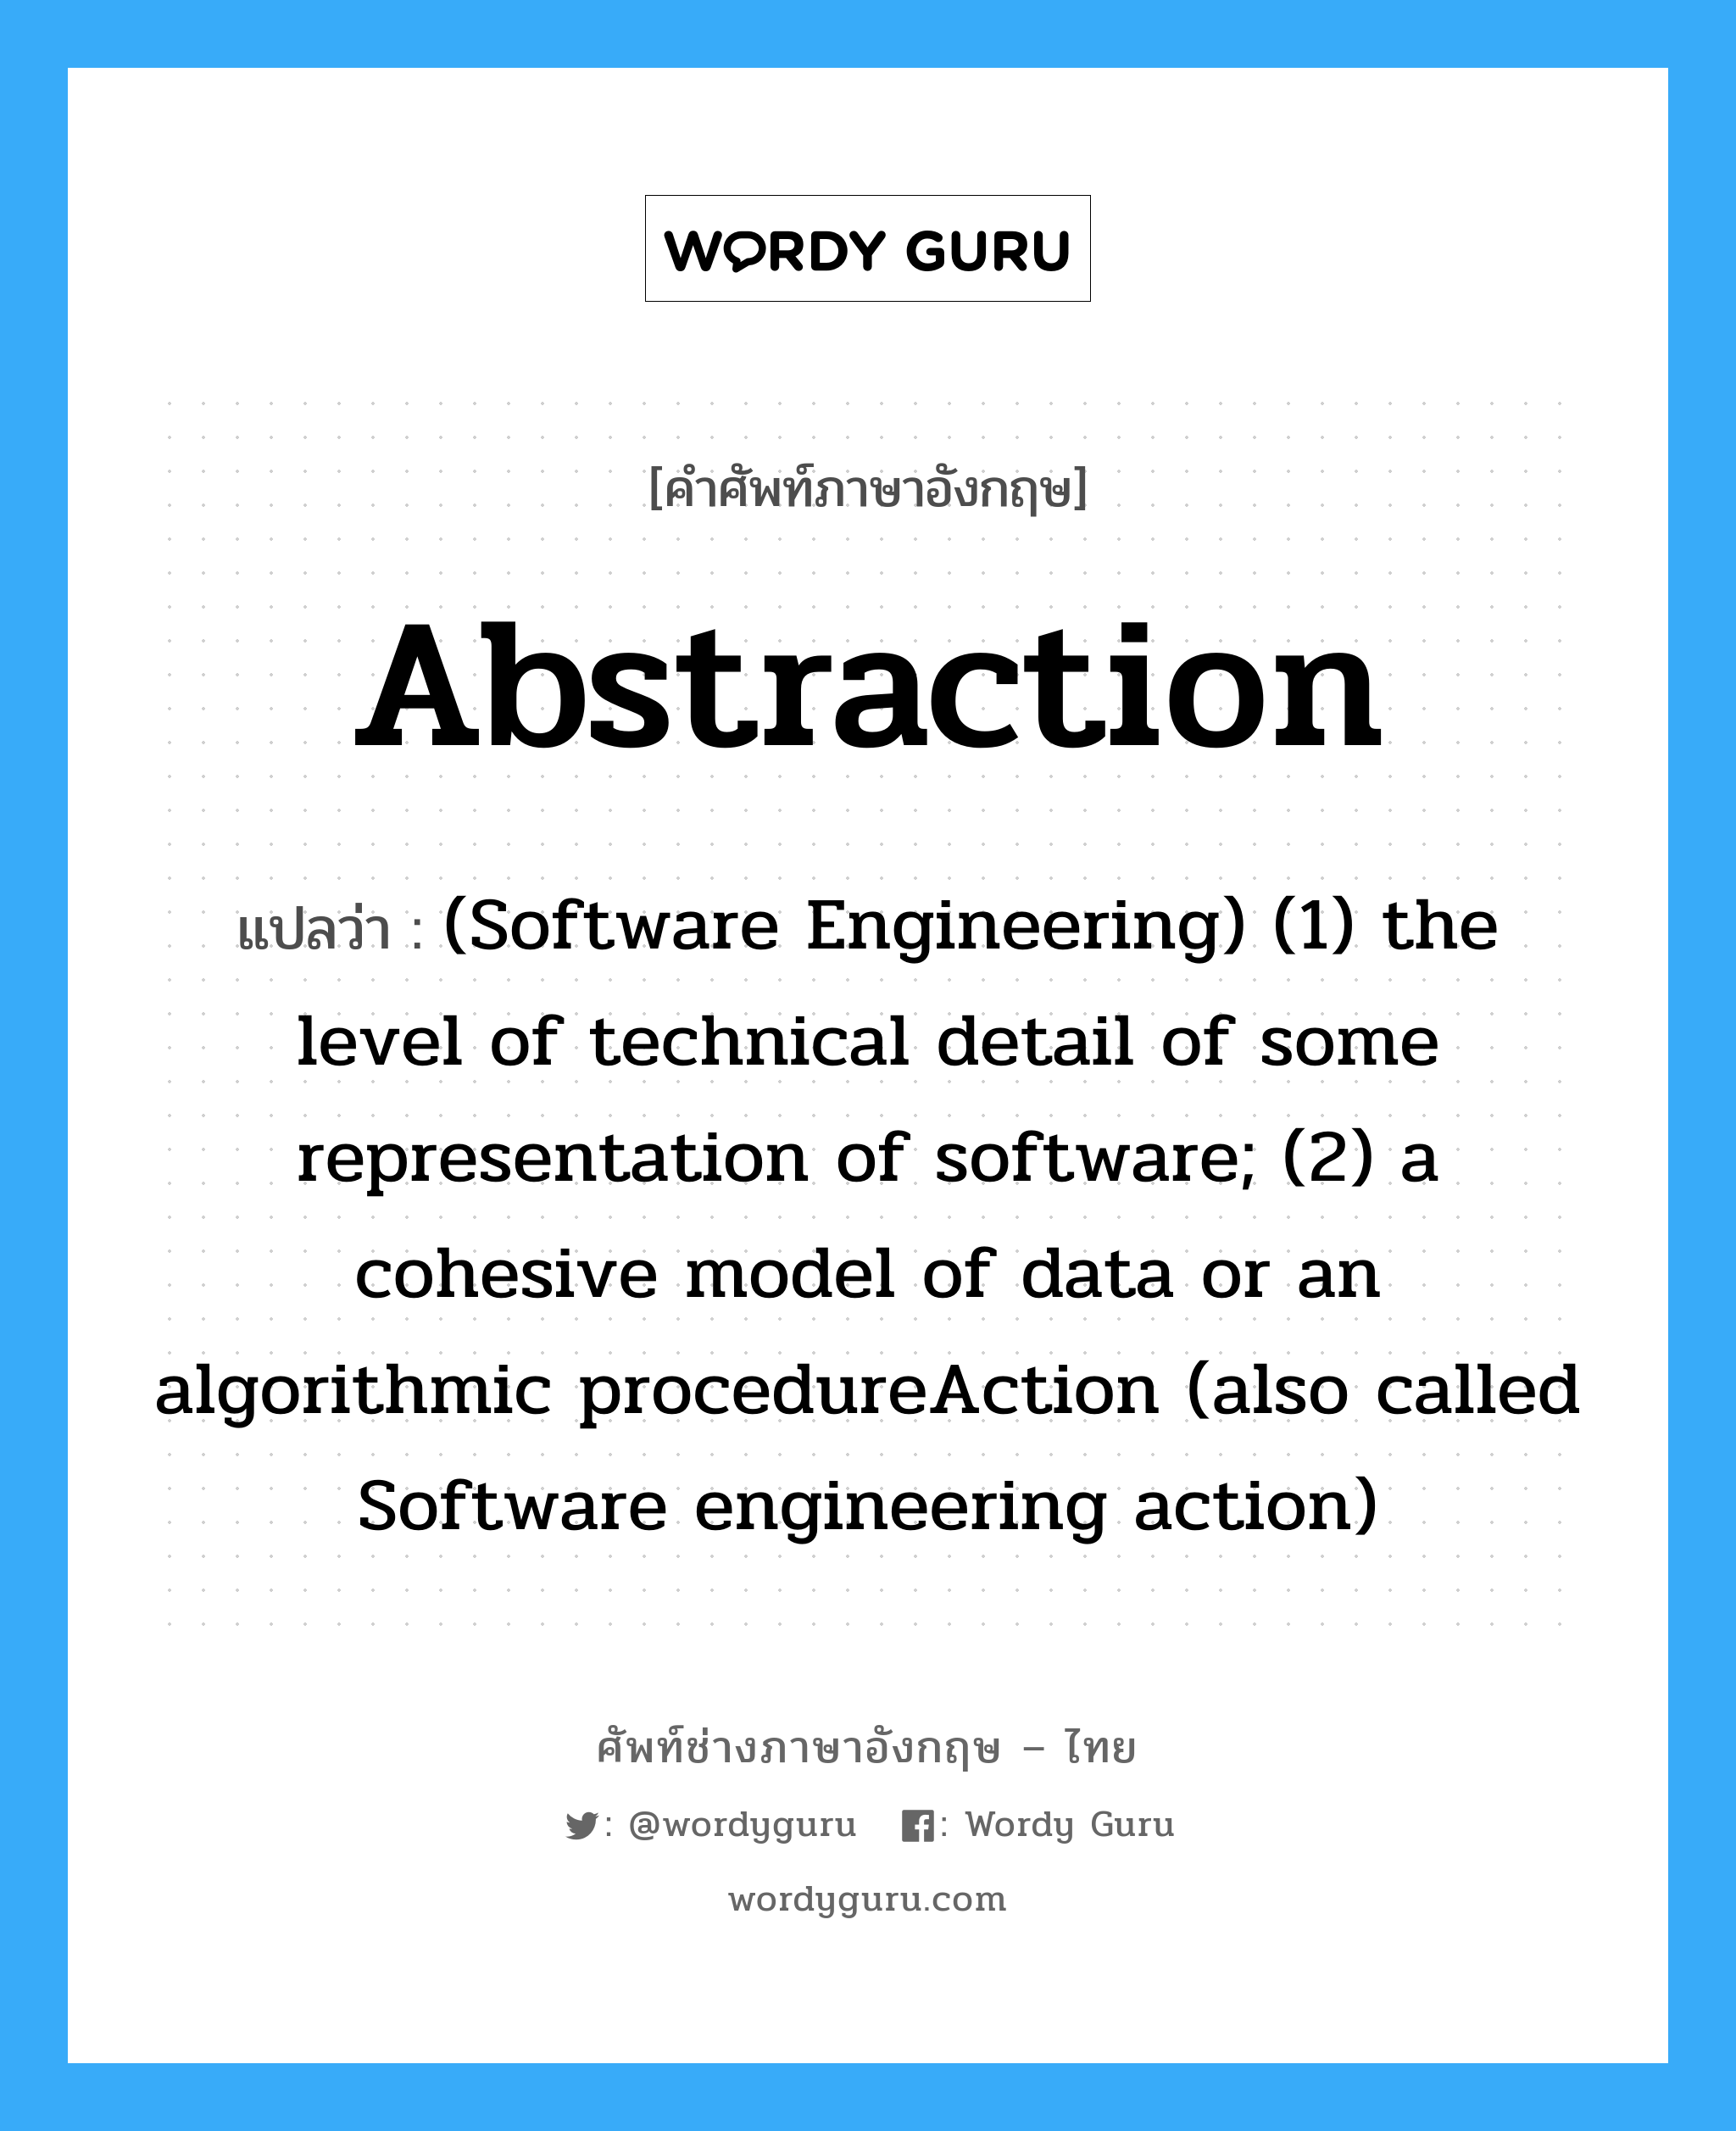 (Software Engineering) (1) the level of technical detail of some representation of software; (2) a cohesive model of data or an algorithmic procedureAction (also called Software engineering action) ภาษาอังกฤษ?, คำศัพท์ช่างภาษาอังกฤษ - ไทย (Software Engineering) (1) the level of technical detail of some representation of software; (2) a cohesive model of data or an algorithmic procedureAction (also called Software engineering action) คำศัพท์ภาษาอังกฤษ (Software Engineering) (1) the level of technical detail of some representation of software; (2) a cohesive model of data or an algorithmic procedureAction (also called Software engineering action) แปลว่า Abstraction